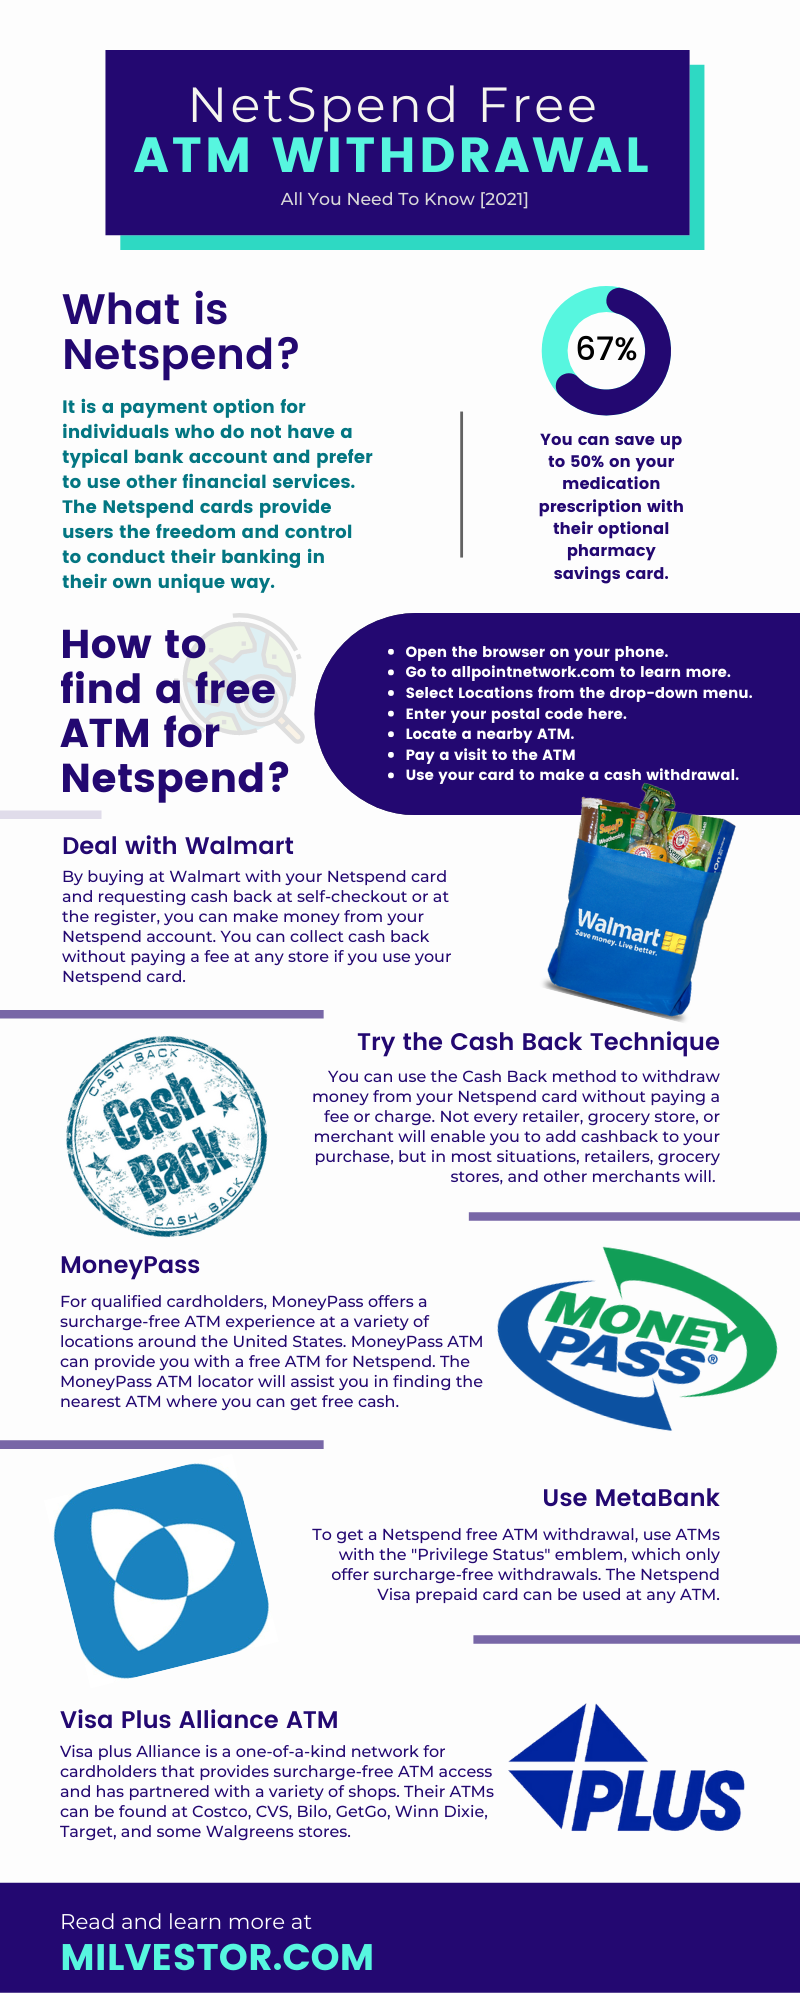 NetSpend Free ATM Withdrawal